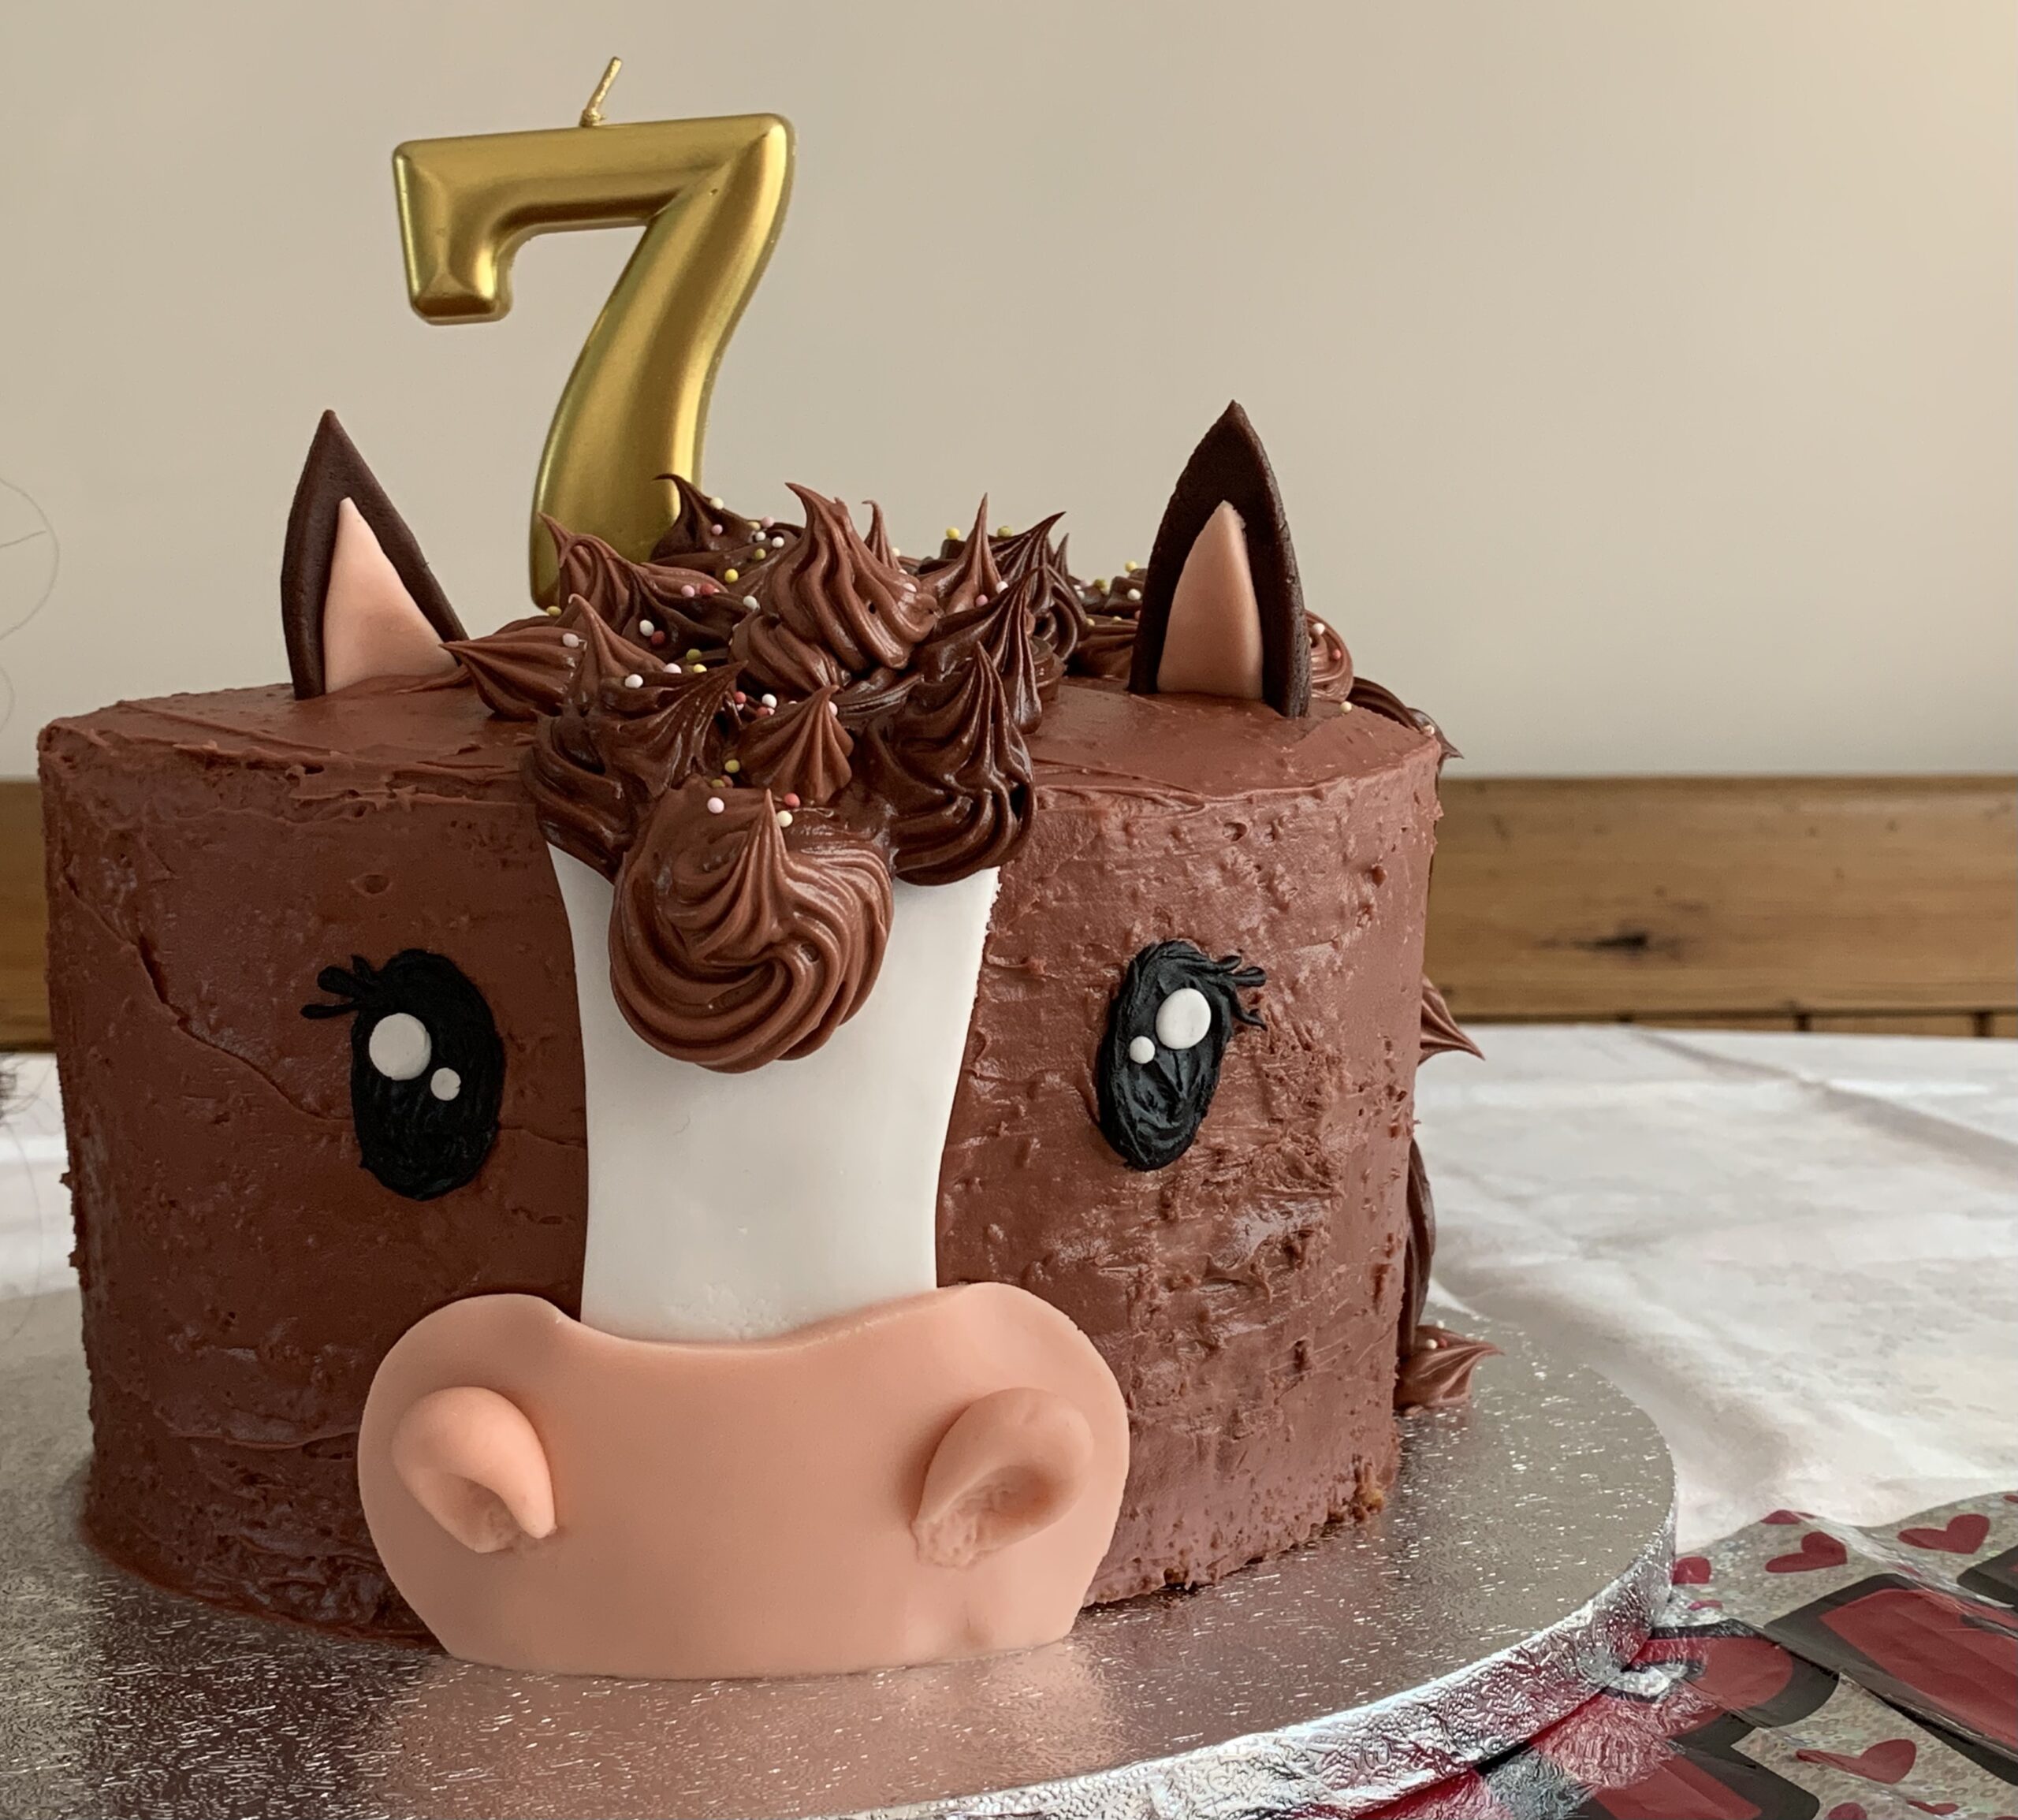 Amazon.com: Horse 1/4 sheet (10.5 x 8 in.) Edible cake topper image Birthday  Party Decoration. : Grocery & Gourmet Food